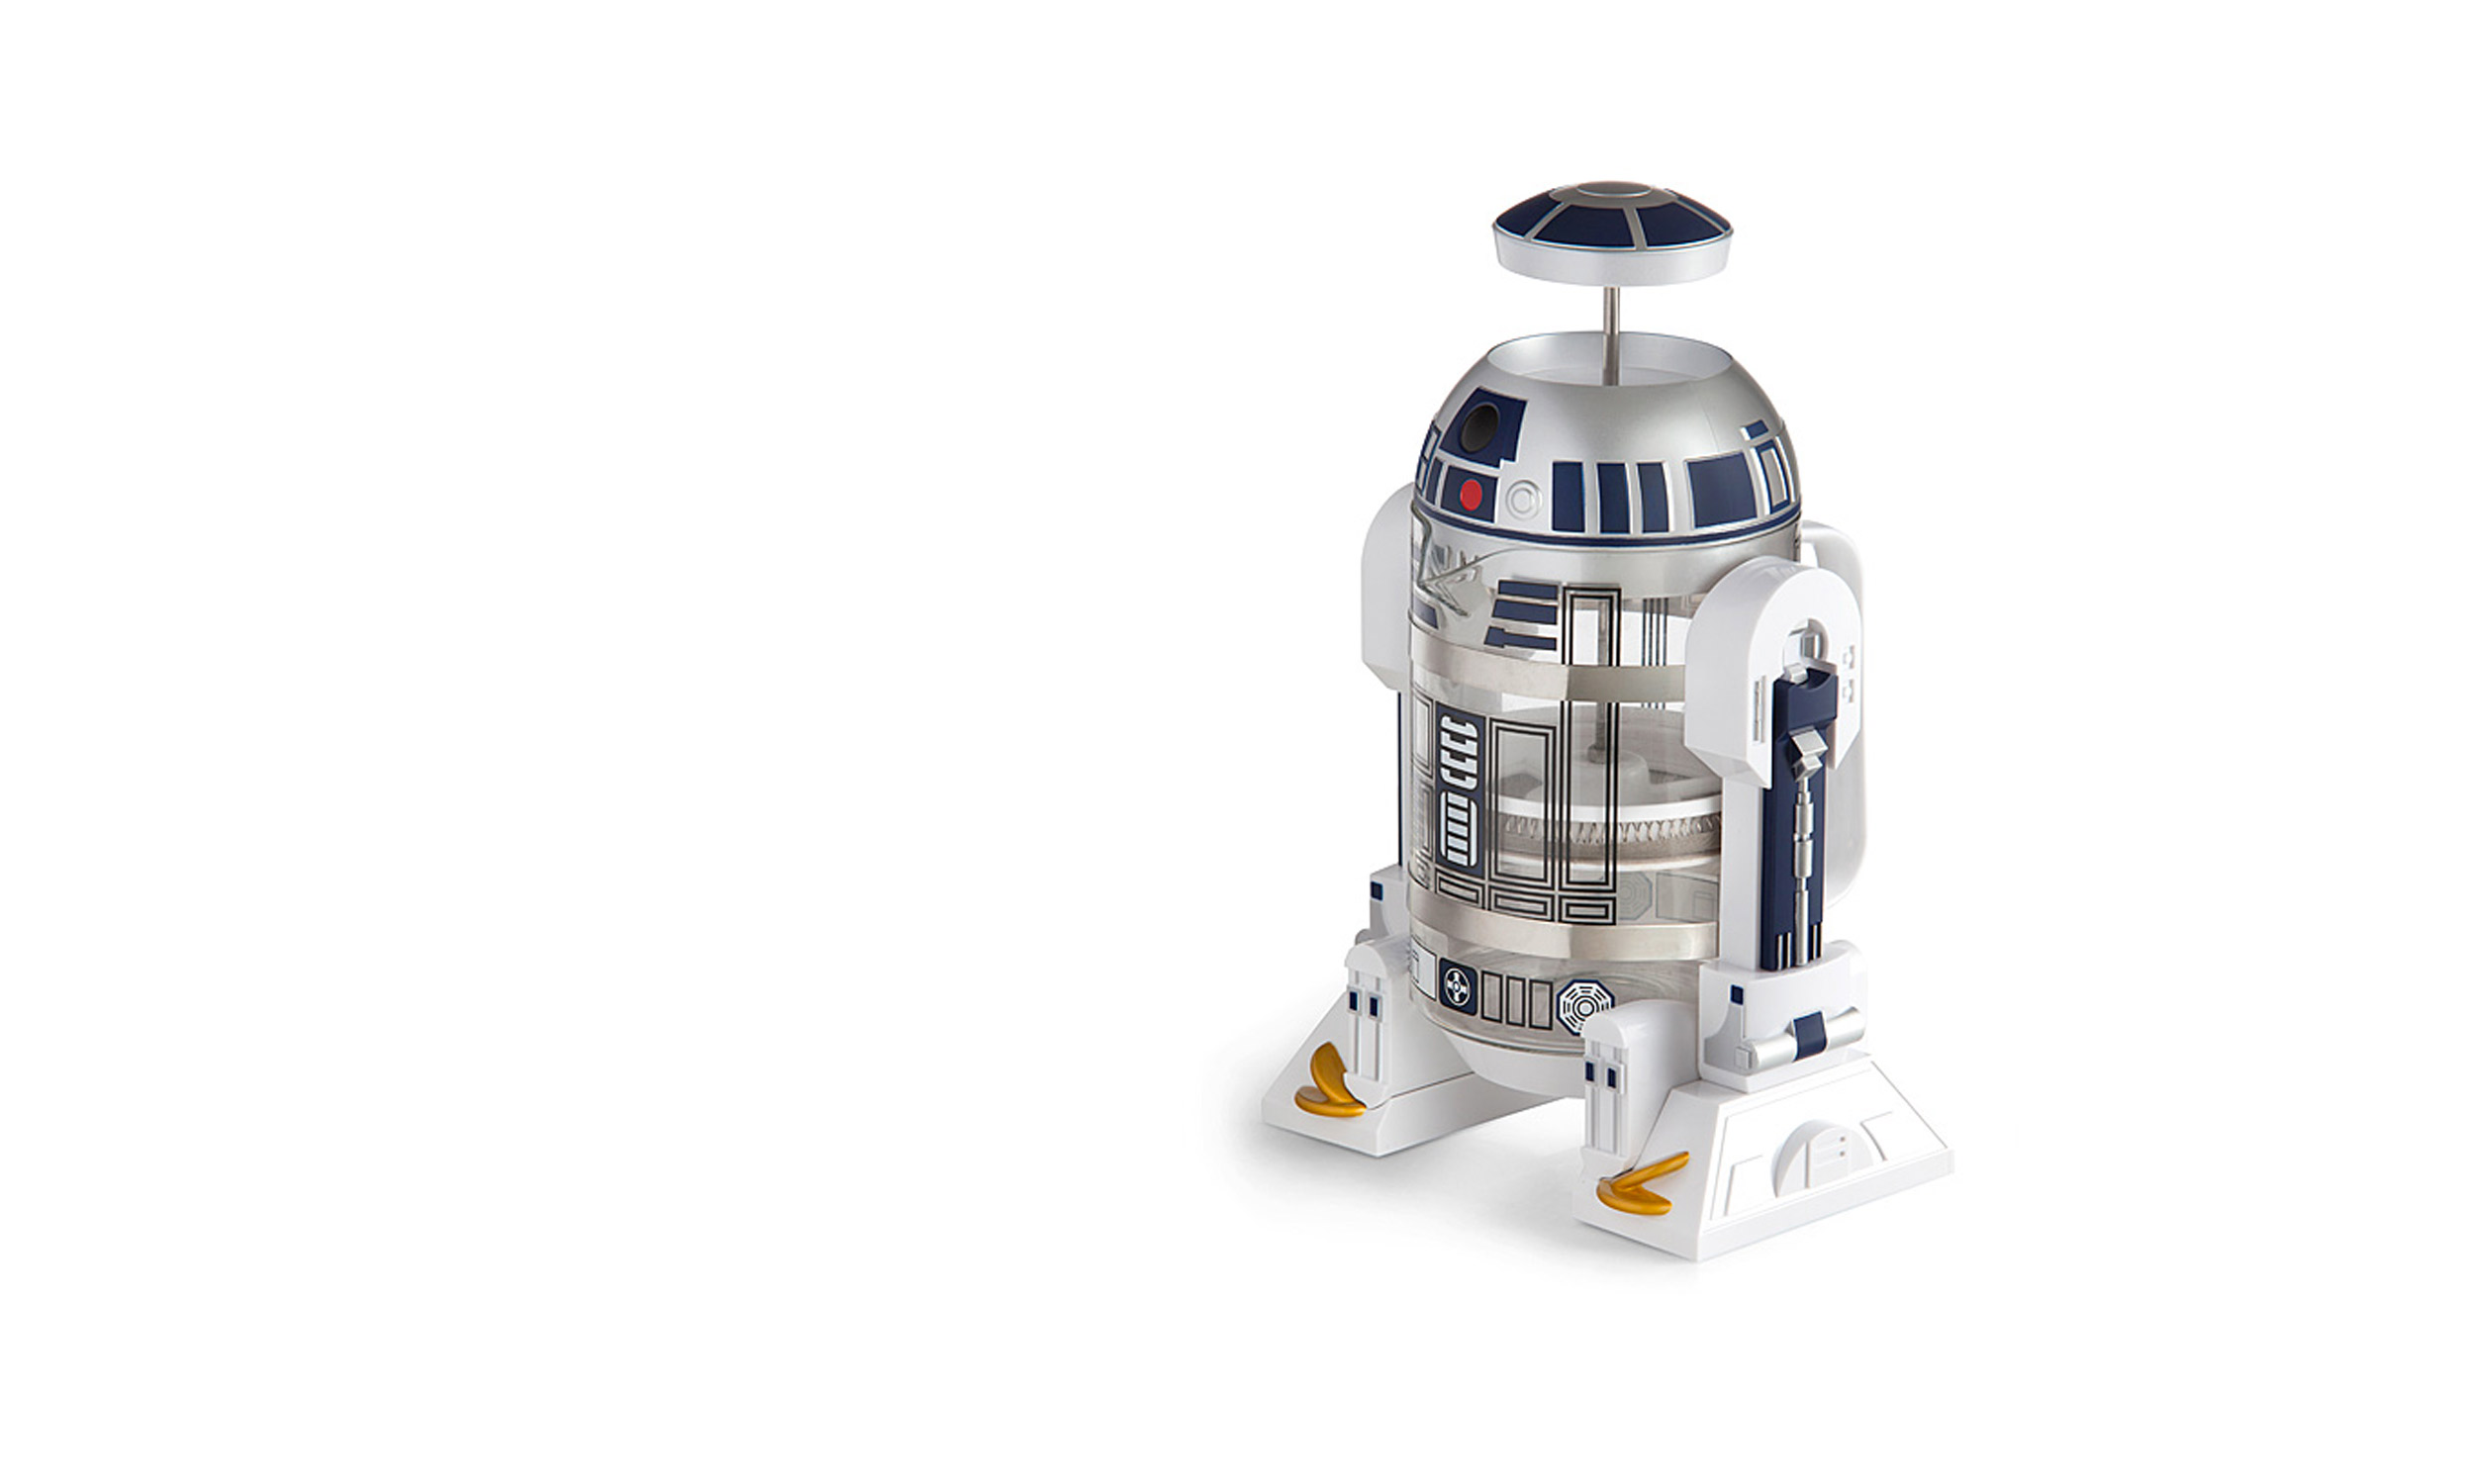 field-image-r2d2-french-press-hero